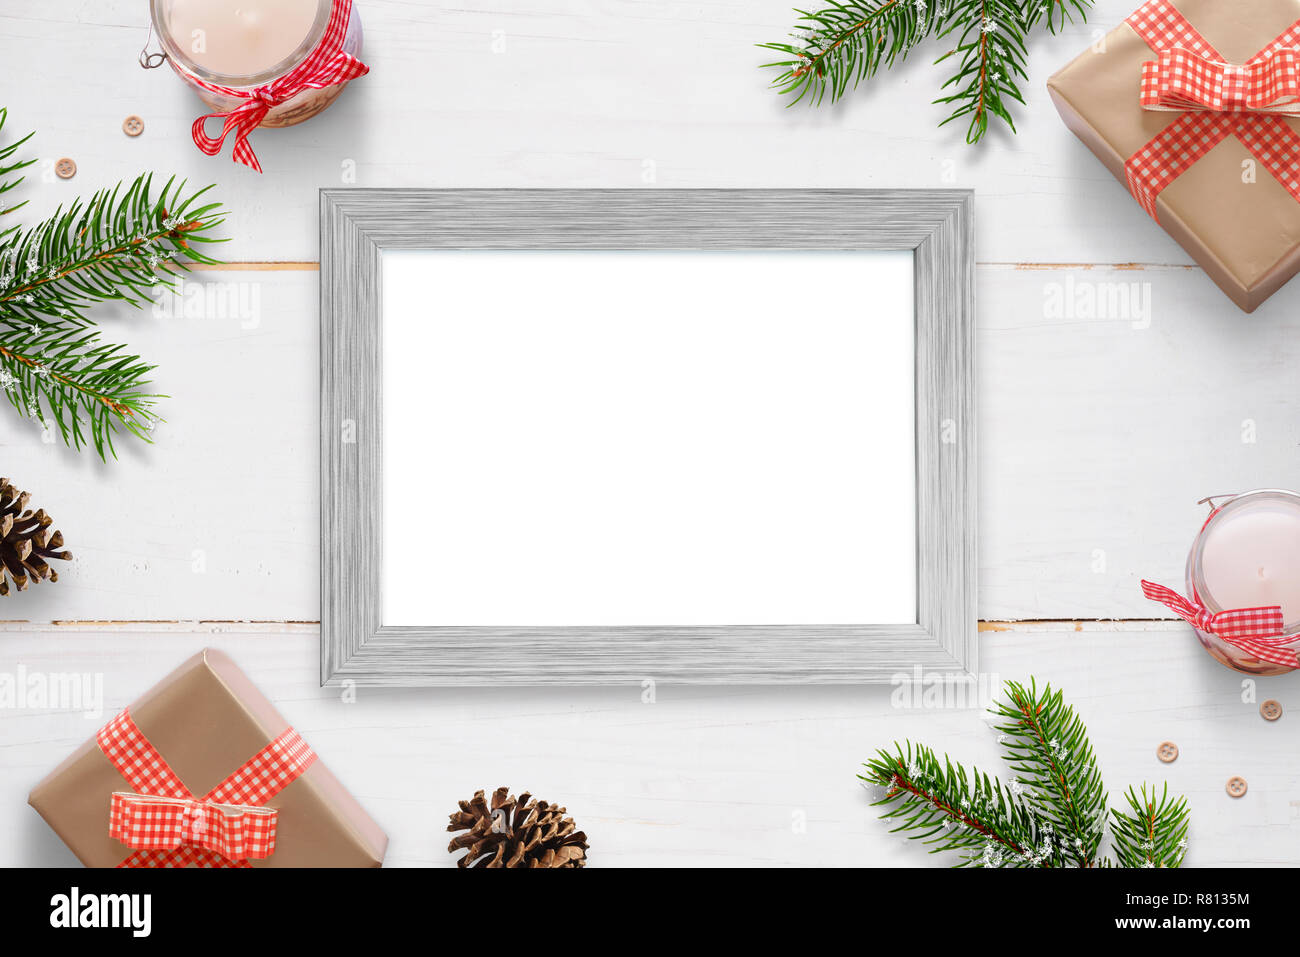 Horizontal photo frame surrounded with Christmas New Year gifts, tree branches and decorations. Isolated frame for photo mockup. Stock Photo